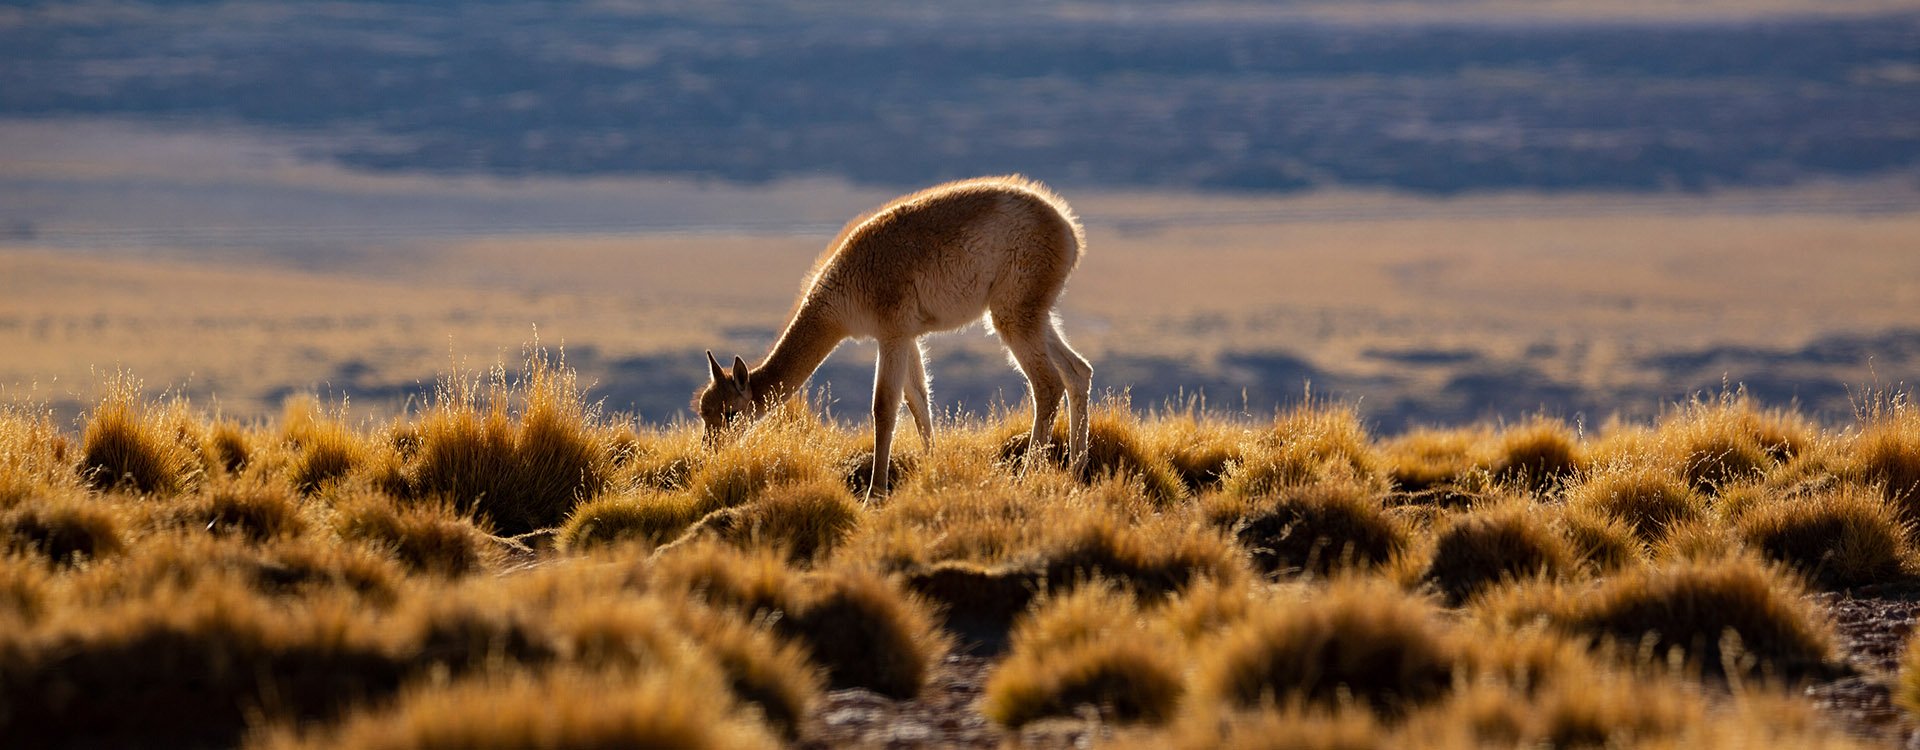 Guanaco in the Torres del Paine National Park. Autumn in Patagonia, Chile, South America